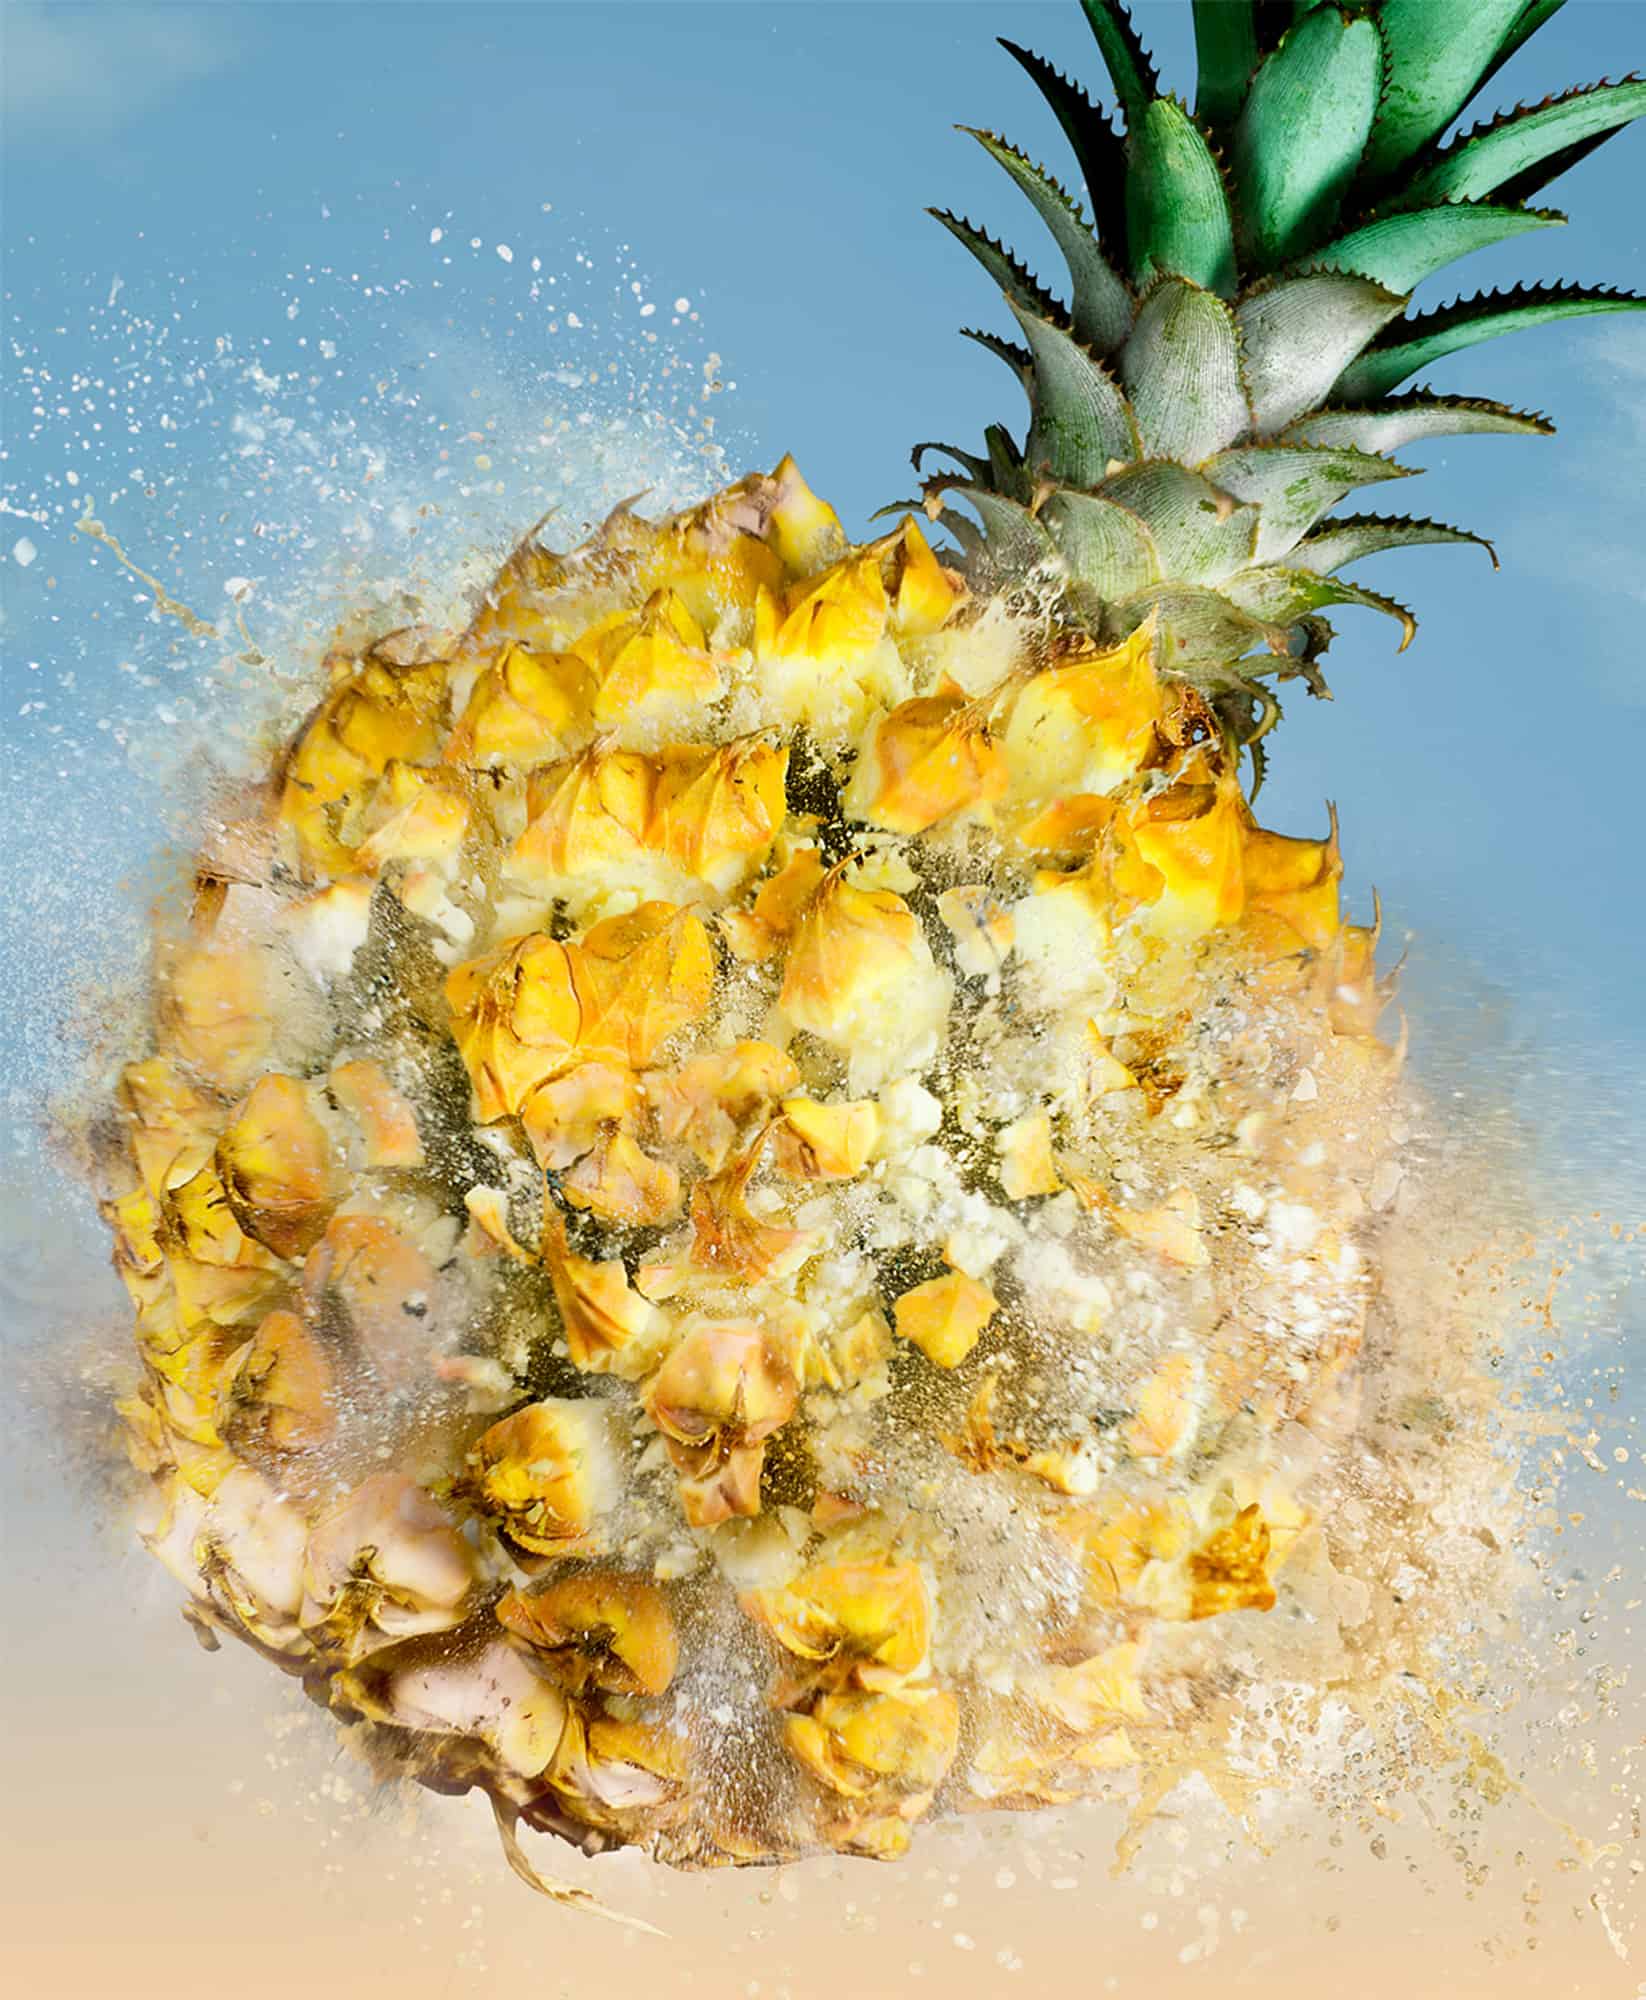 Advertising Campaign for Dole Exploding Pineapple